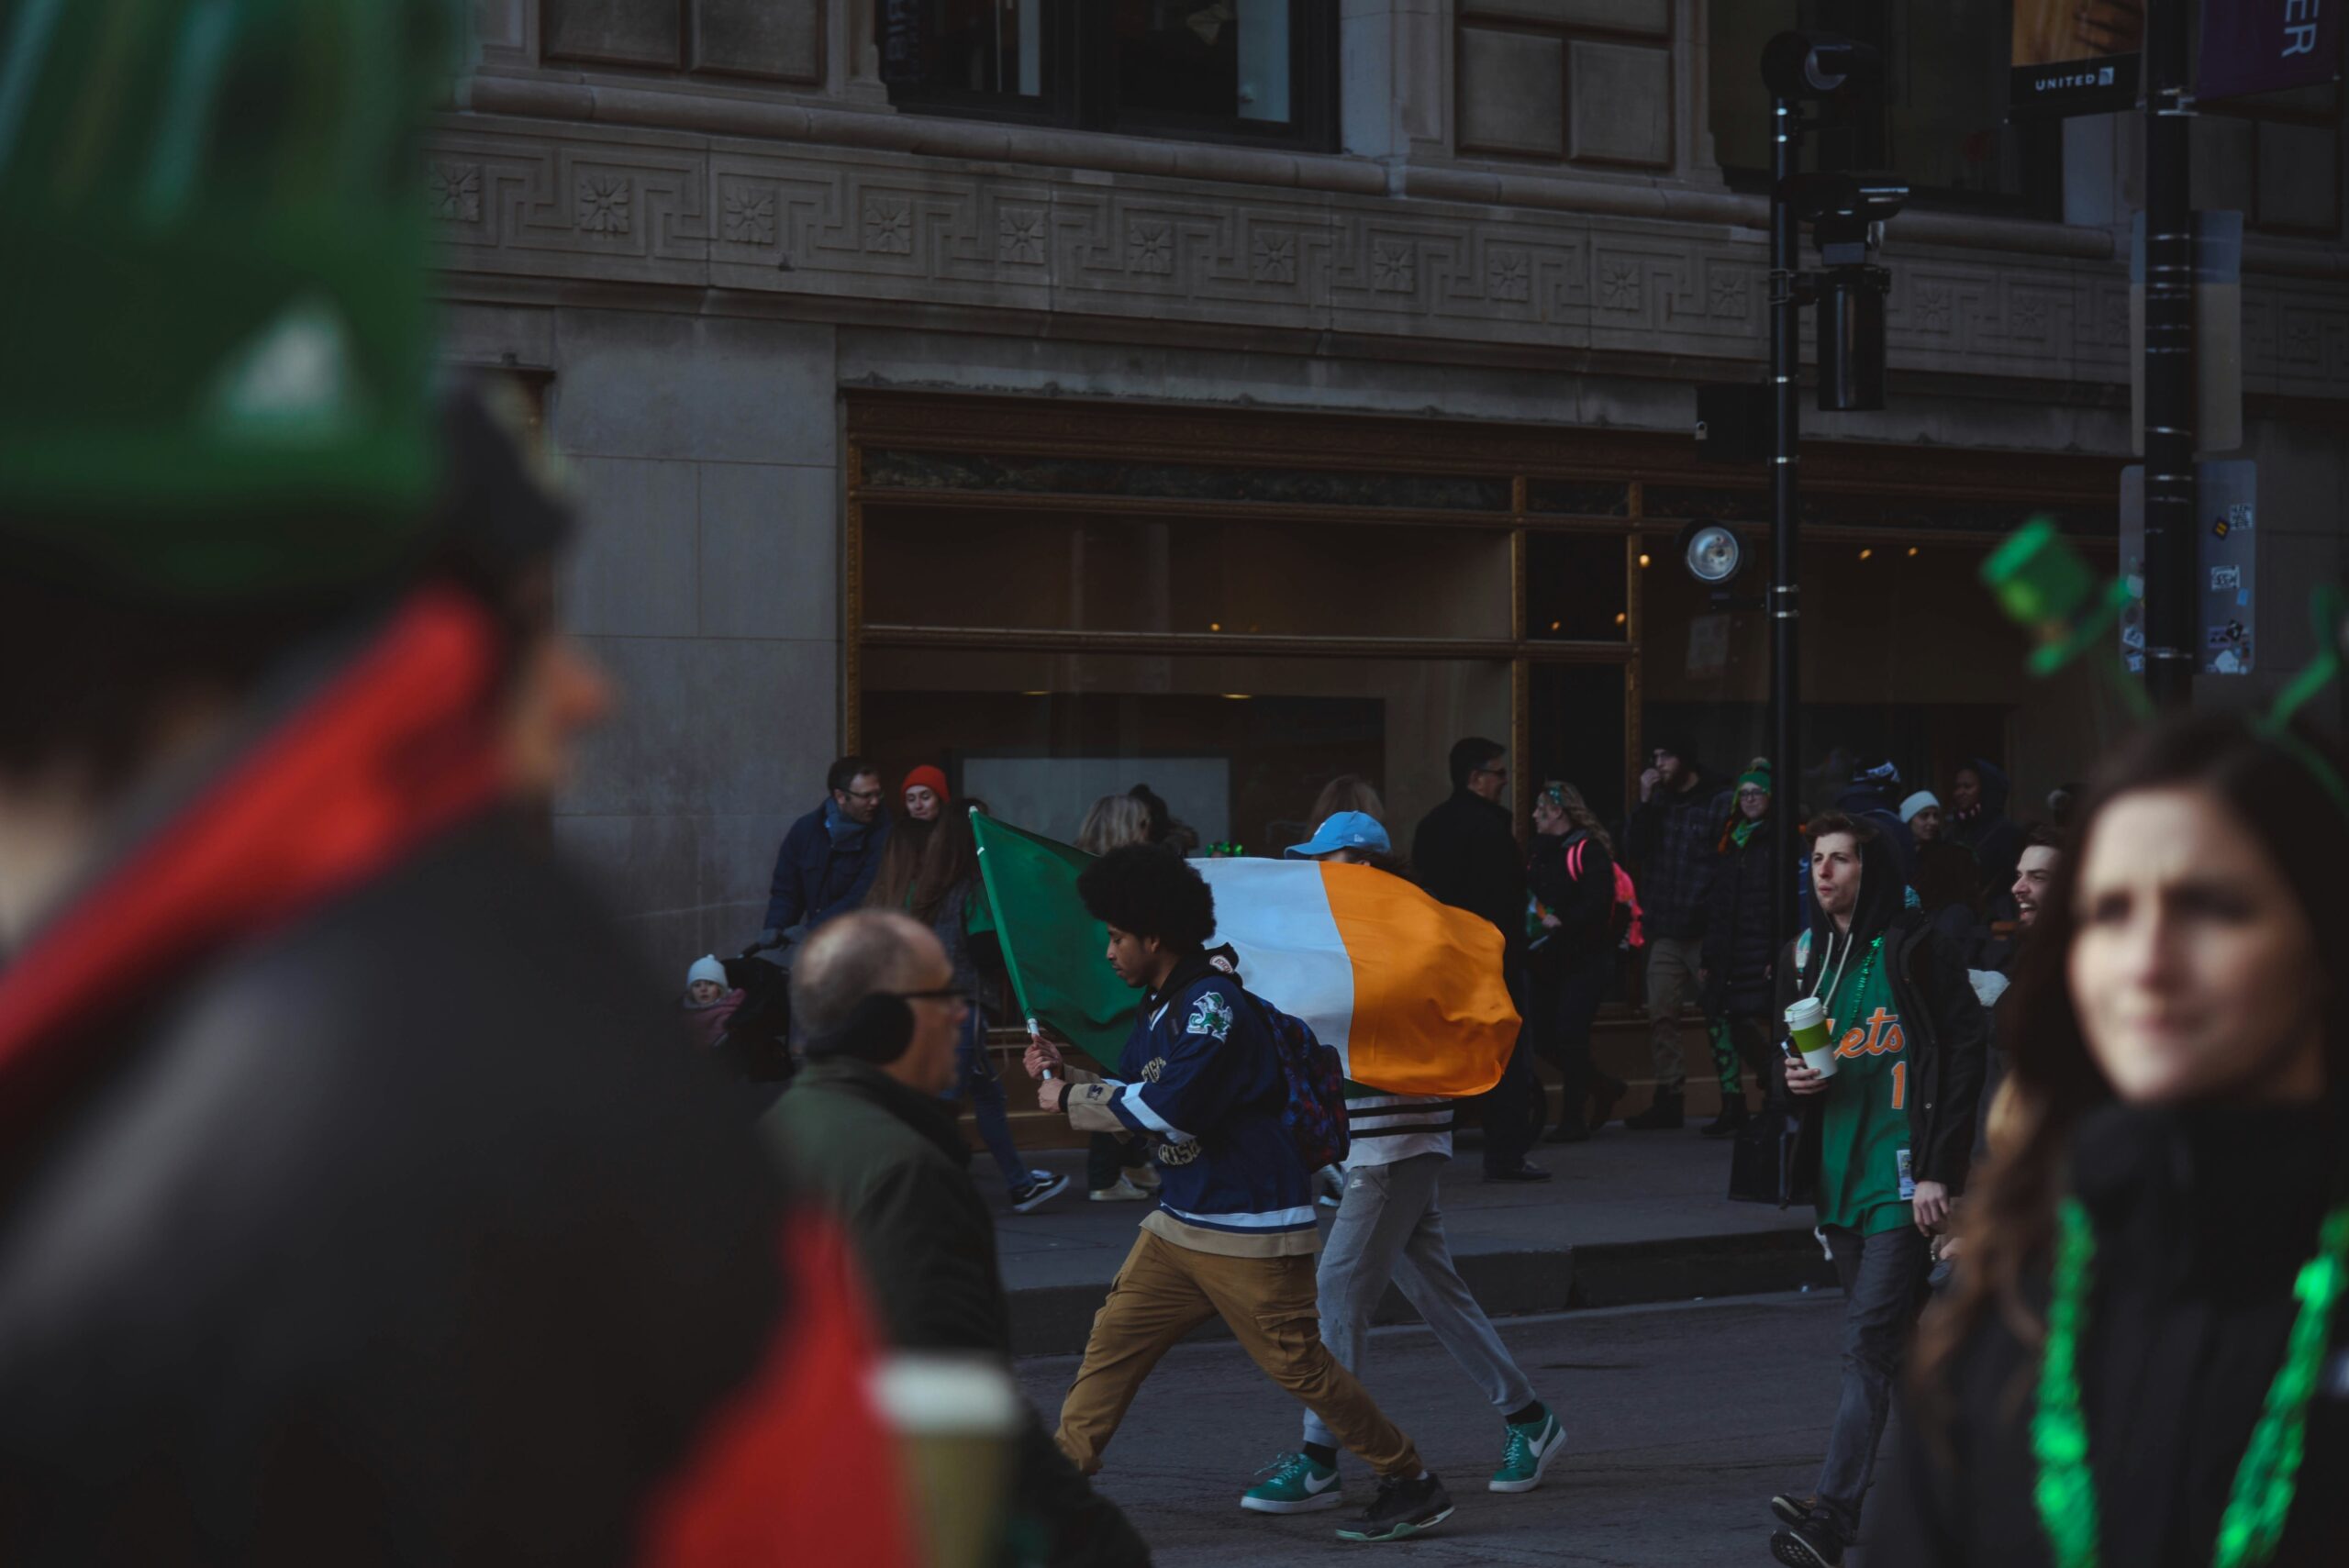 Learn more about how St. Patrick's Day is celebrated in New Orleans. 
pictured: a St. Patrick's Day parade with attendees celebrating in the streets